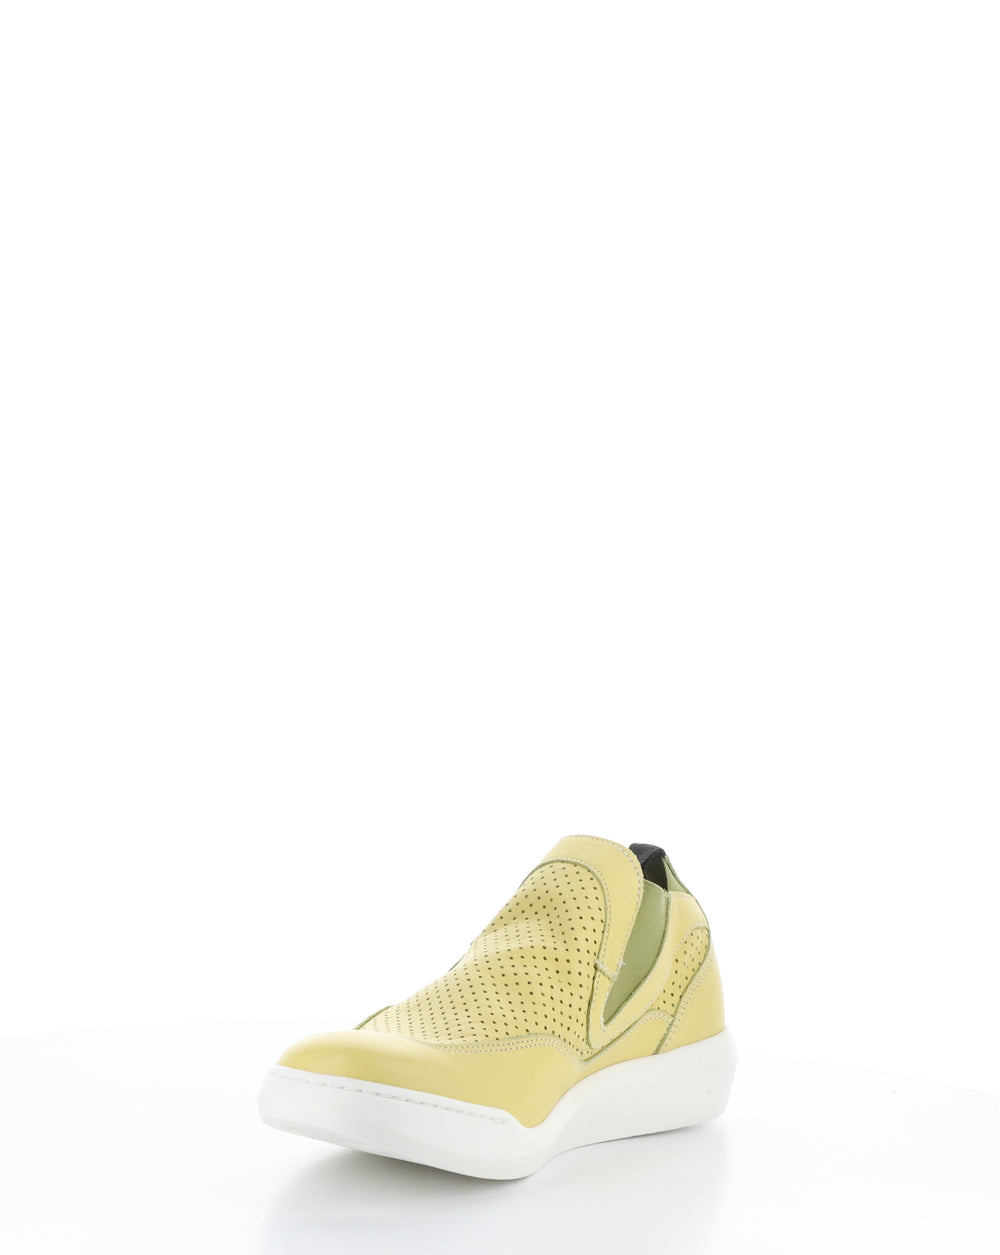 BRAY721SOF 004 LT YELLOW Elasticated Shoes